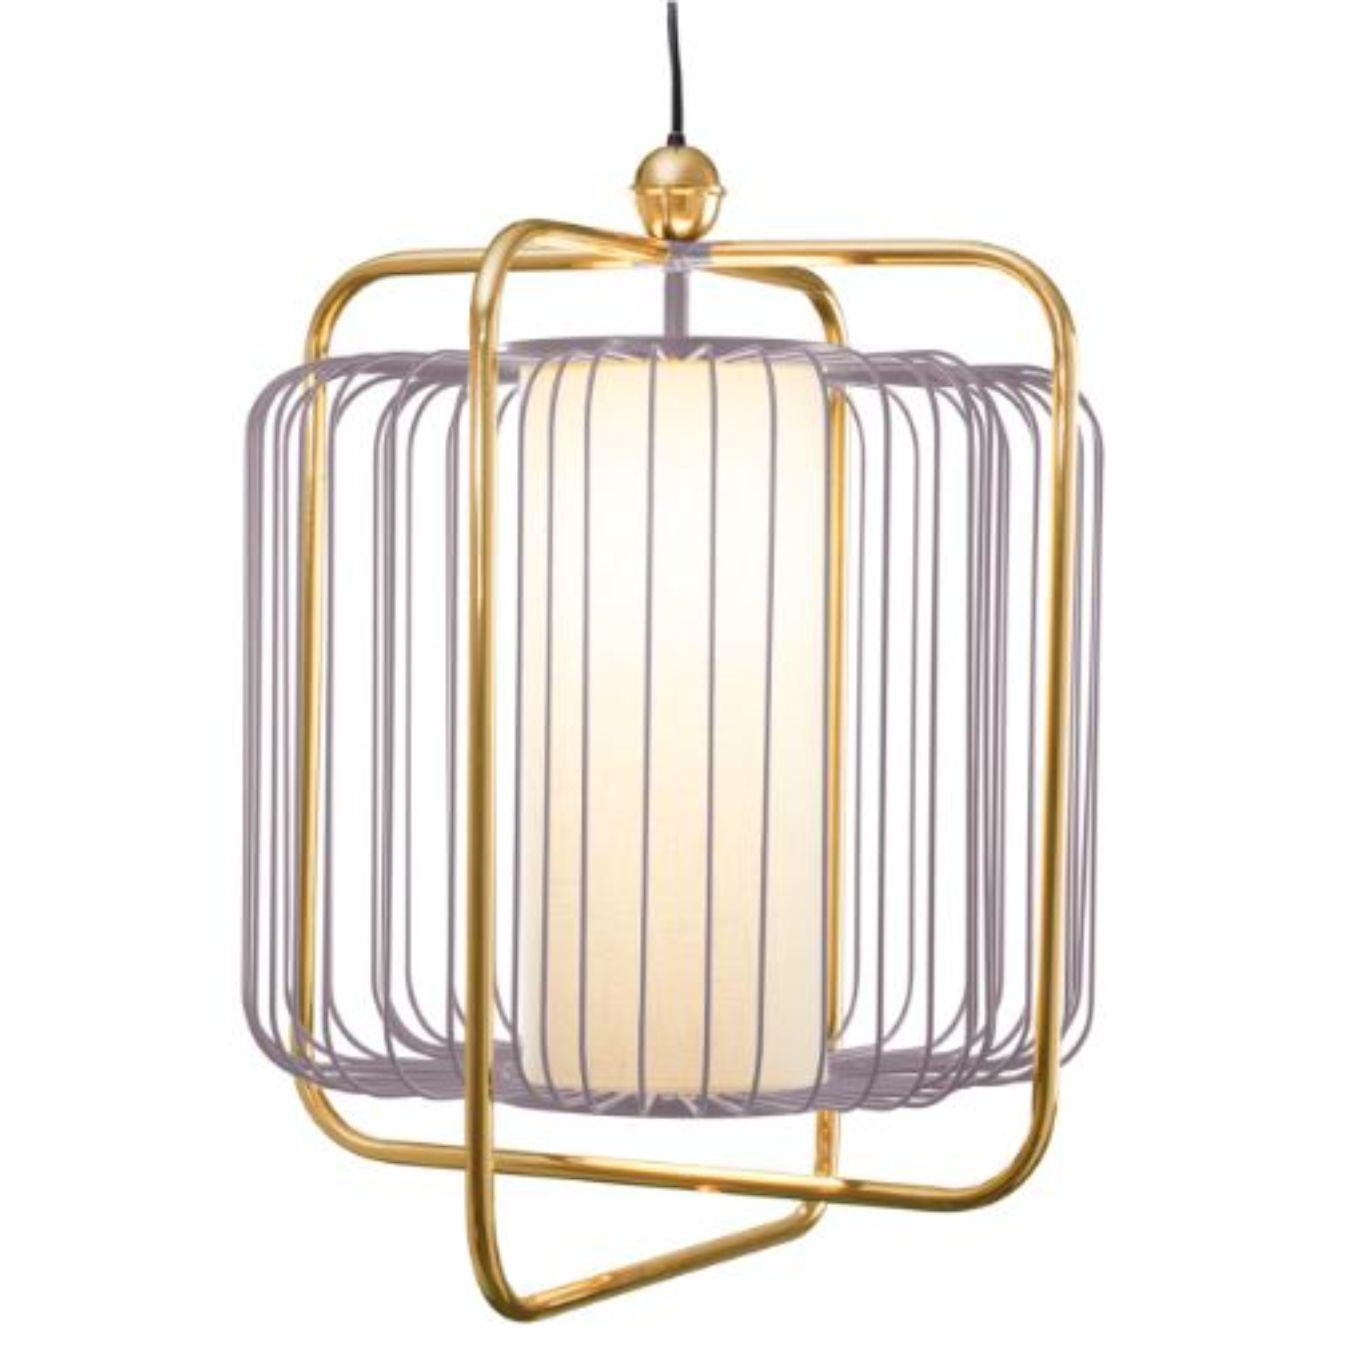 Brass and Lilac Jules suspension lamp by Dooq
Dimensions: W 73 x D 73 x H 72 cm
Materials: lacquered metal, polished or brushed metal, brass.
abat-jour: cotton
Also available in different colours and